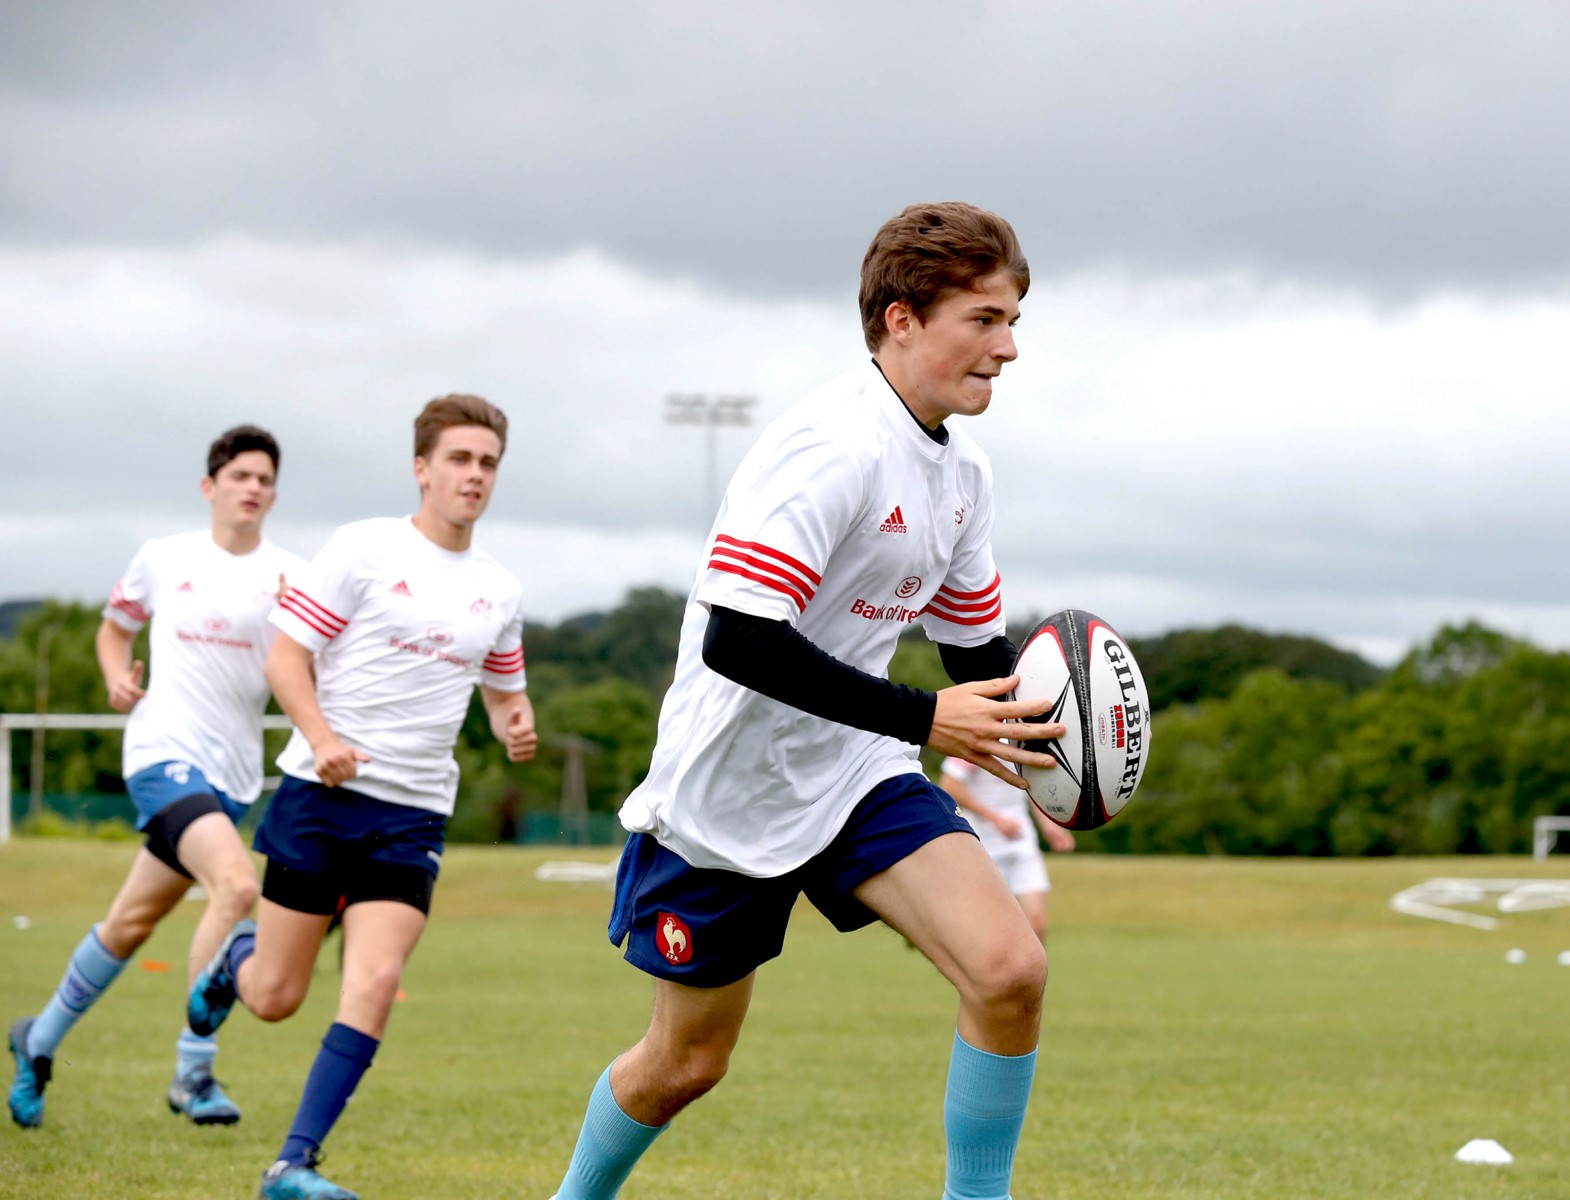 Anglais et Rugby avec le Munster Rugby Club